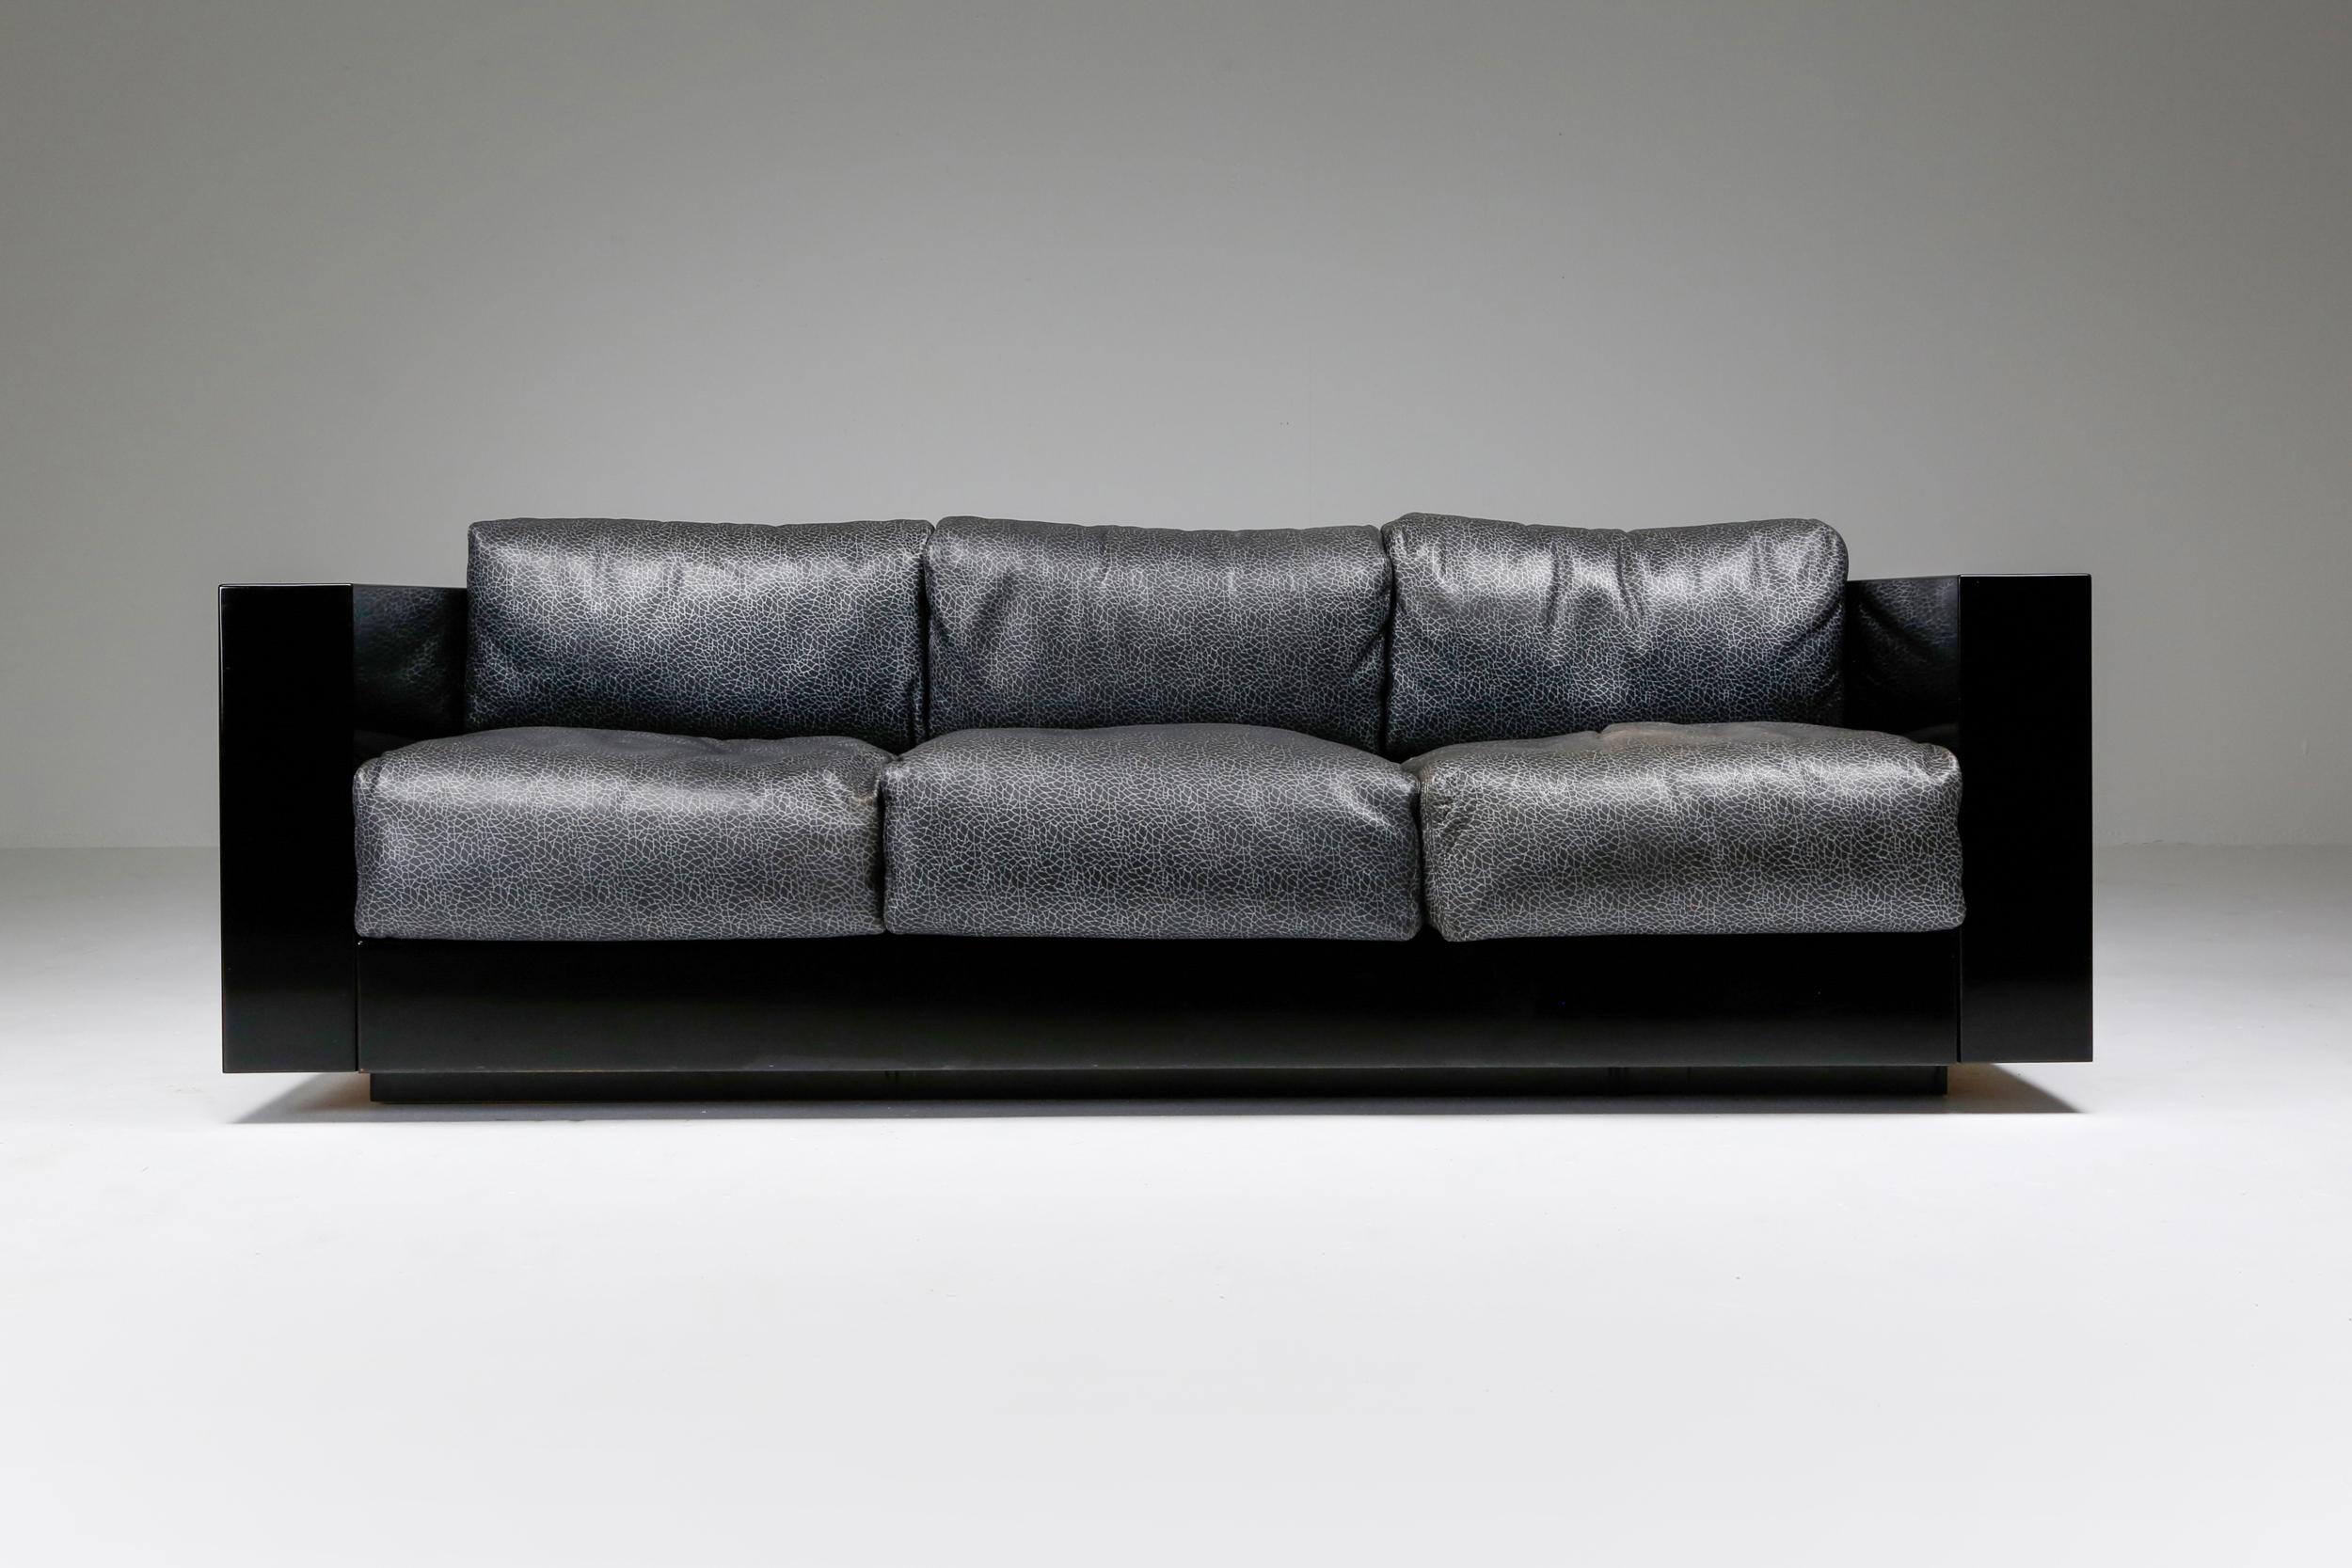 'Saratoga' three-seat sofa by Italian designers Massimo and Lella Vignelli for Poltronova in luxurious elephant grey leather. Crafted in Italy in 1964, this sofa epitomizes the Vignellis' signature style of clear, architectural design. Stripping